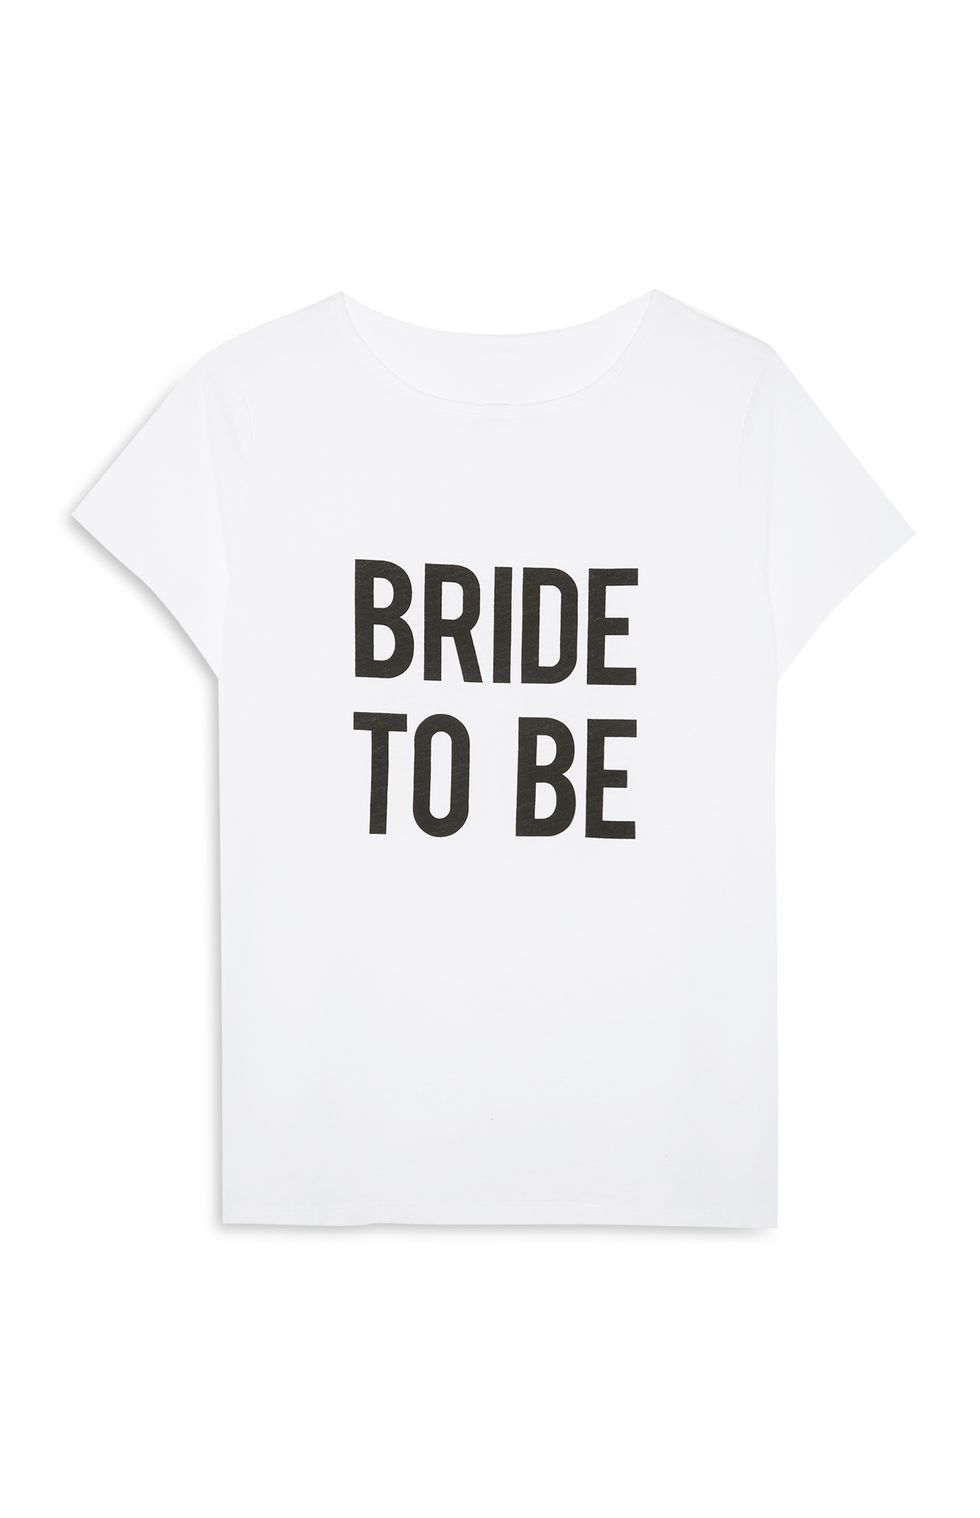 T-shirt Bride to Be - €5